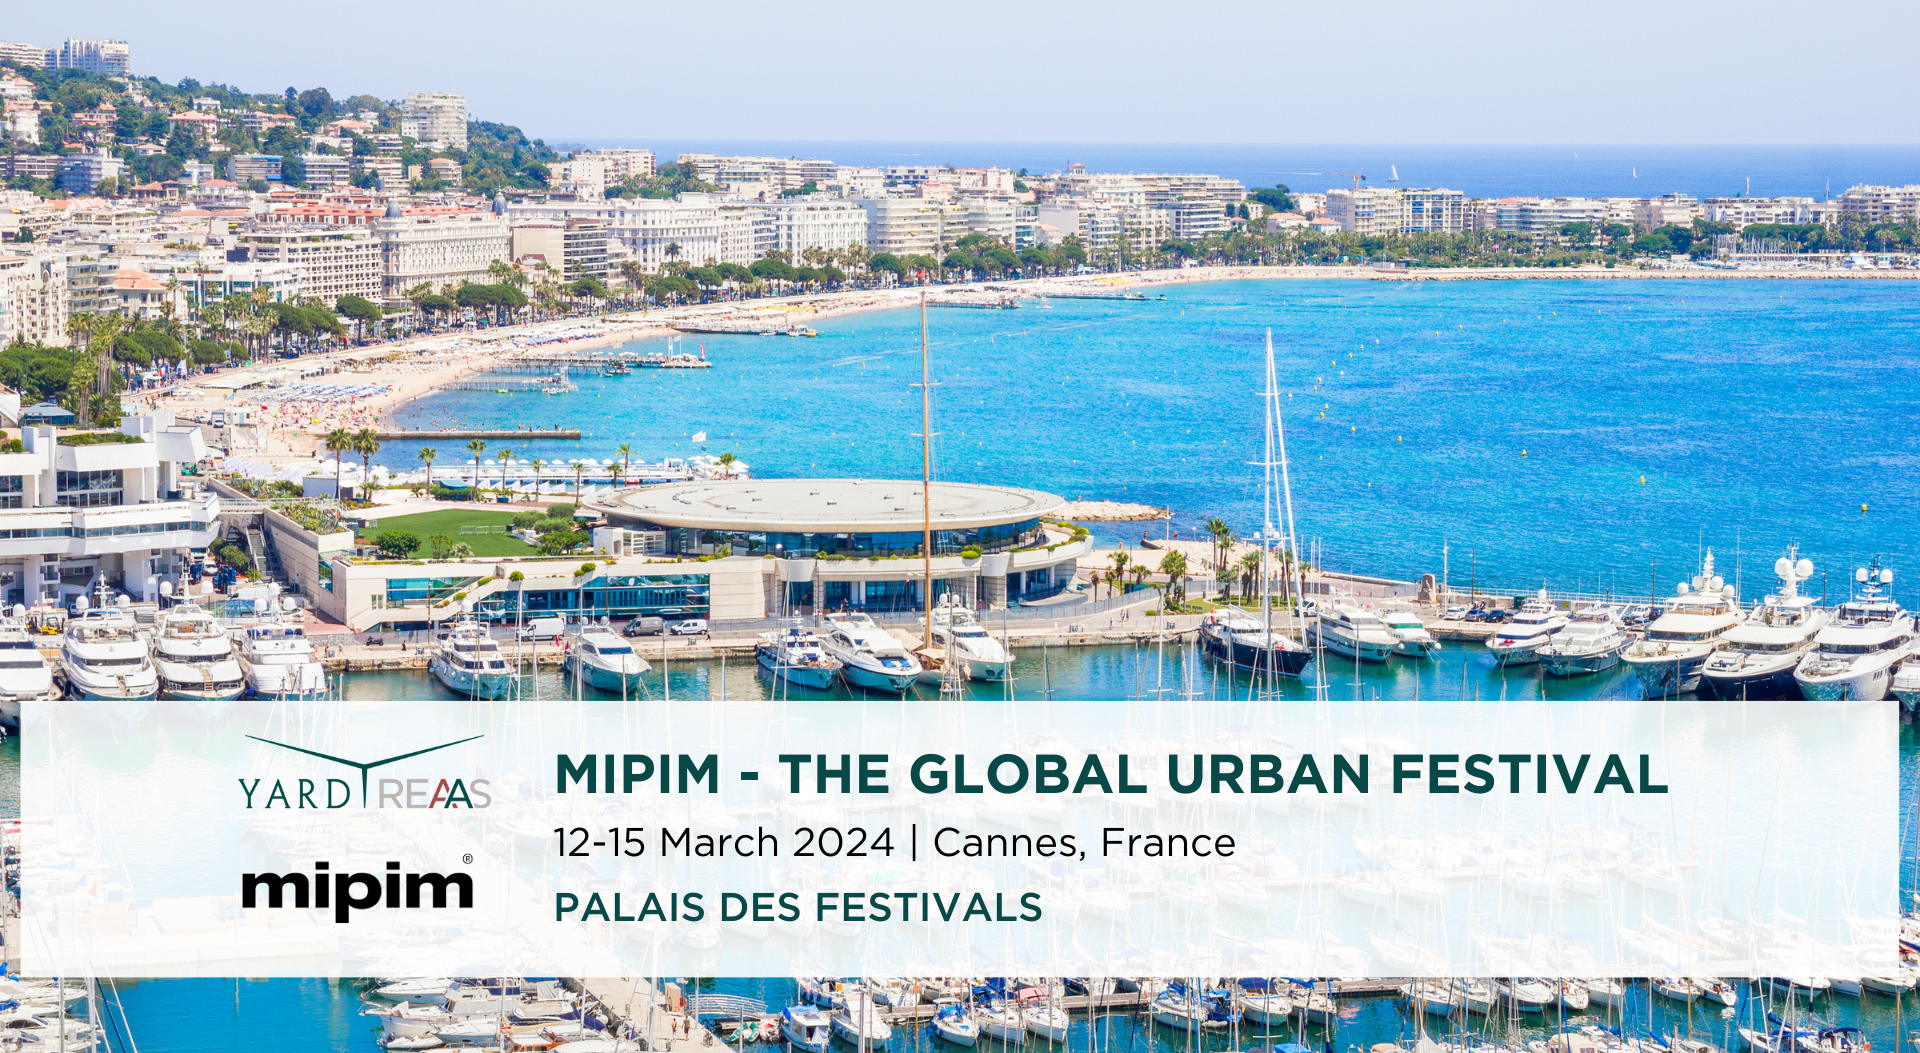 YARD REAAS at Mipim 2024 (March 12-15, Cannes - France)